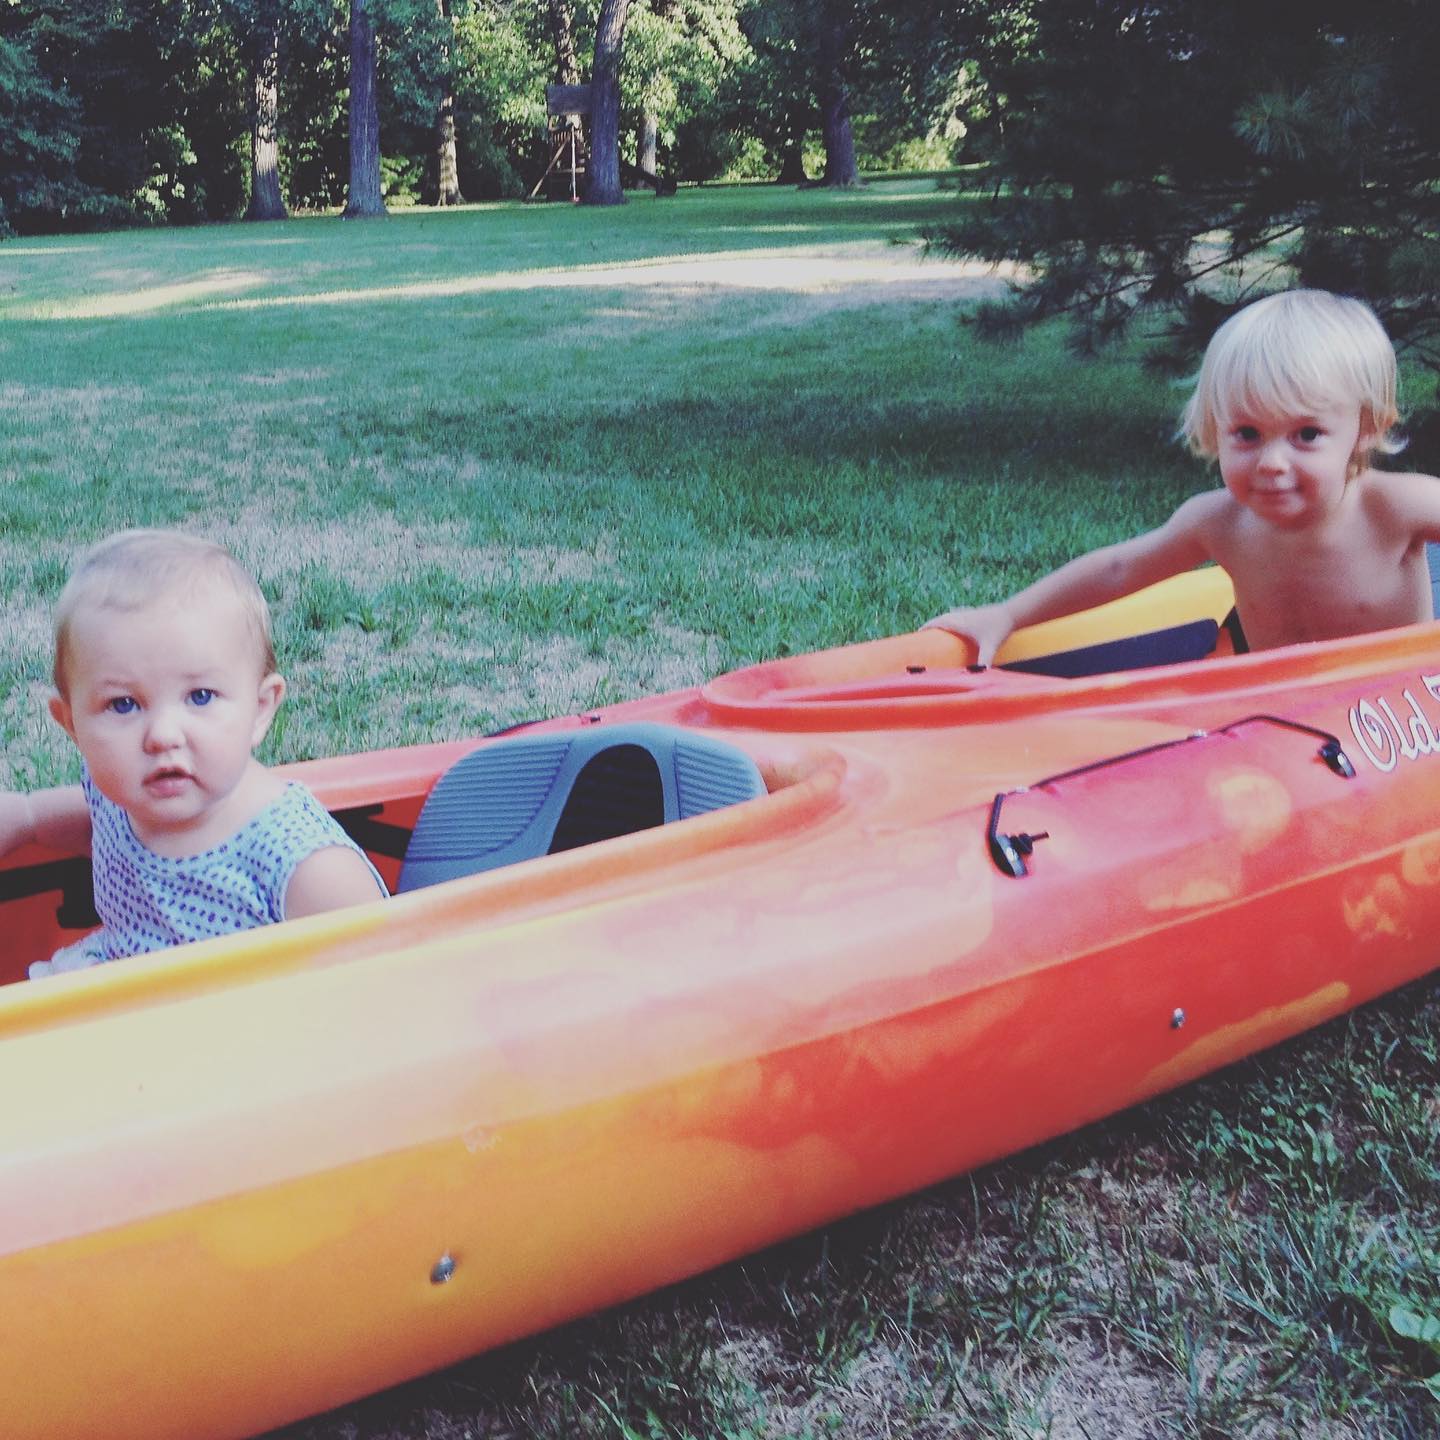 Photo contest! Have a favorite Naperville Kayak photo? Here is one of ours from over the years. We want to see yours! Laughs, group photos, wildlife and more. We will select our 1st, 2nd, and 3rd favorite posts to win a Naperville Kayak giftcard. Tag us at @napervillekayak to enter! Winners will be announced next Thursday the 12th of August.